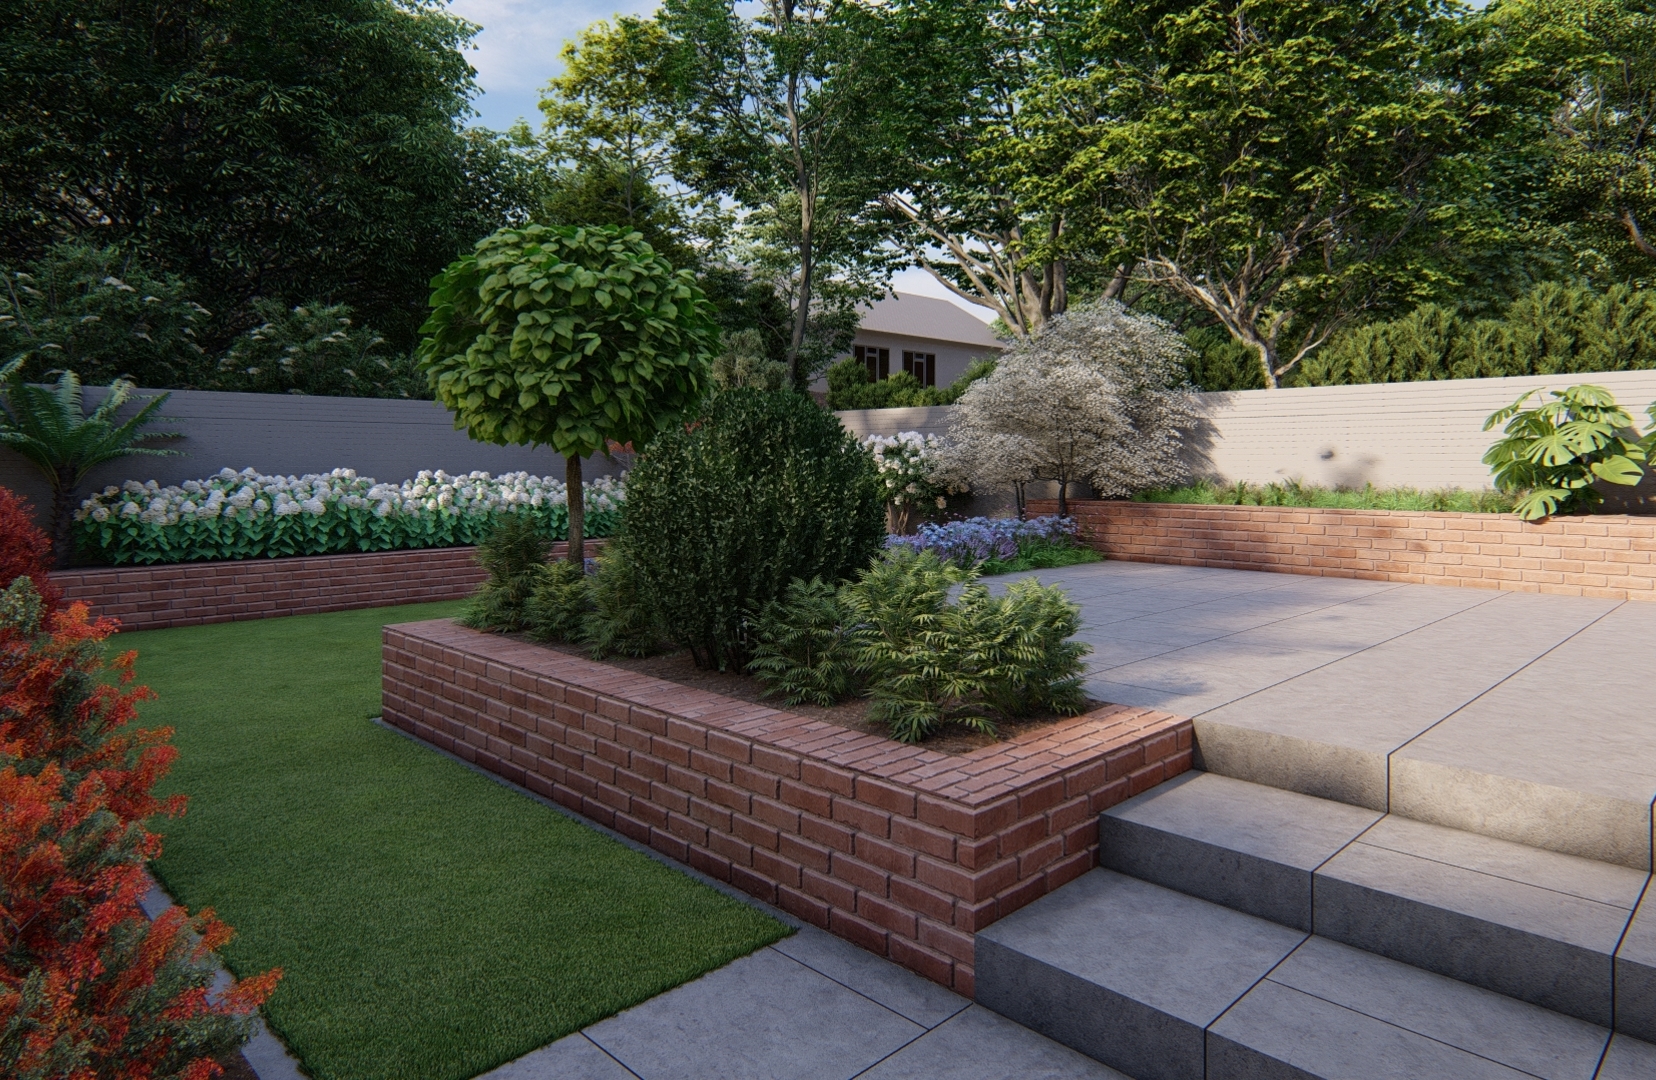 Family Garden Design in Templeogue, Dublin 6W featuring raised Patio, raised planting beds, custom made garden fencing and a colourful low maintenance planting scheme | Owen Chubb Garden Landscapers